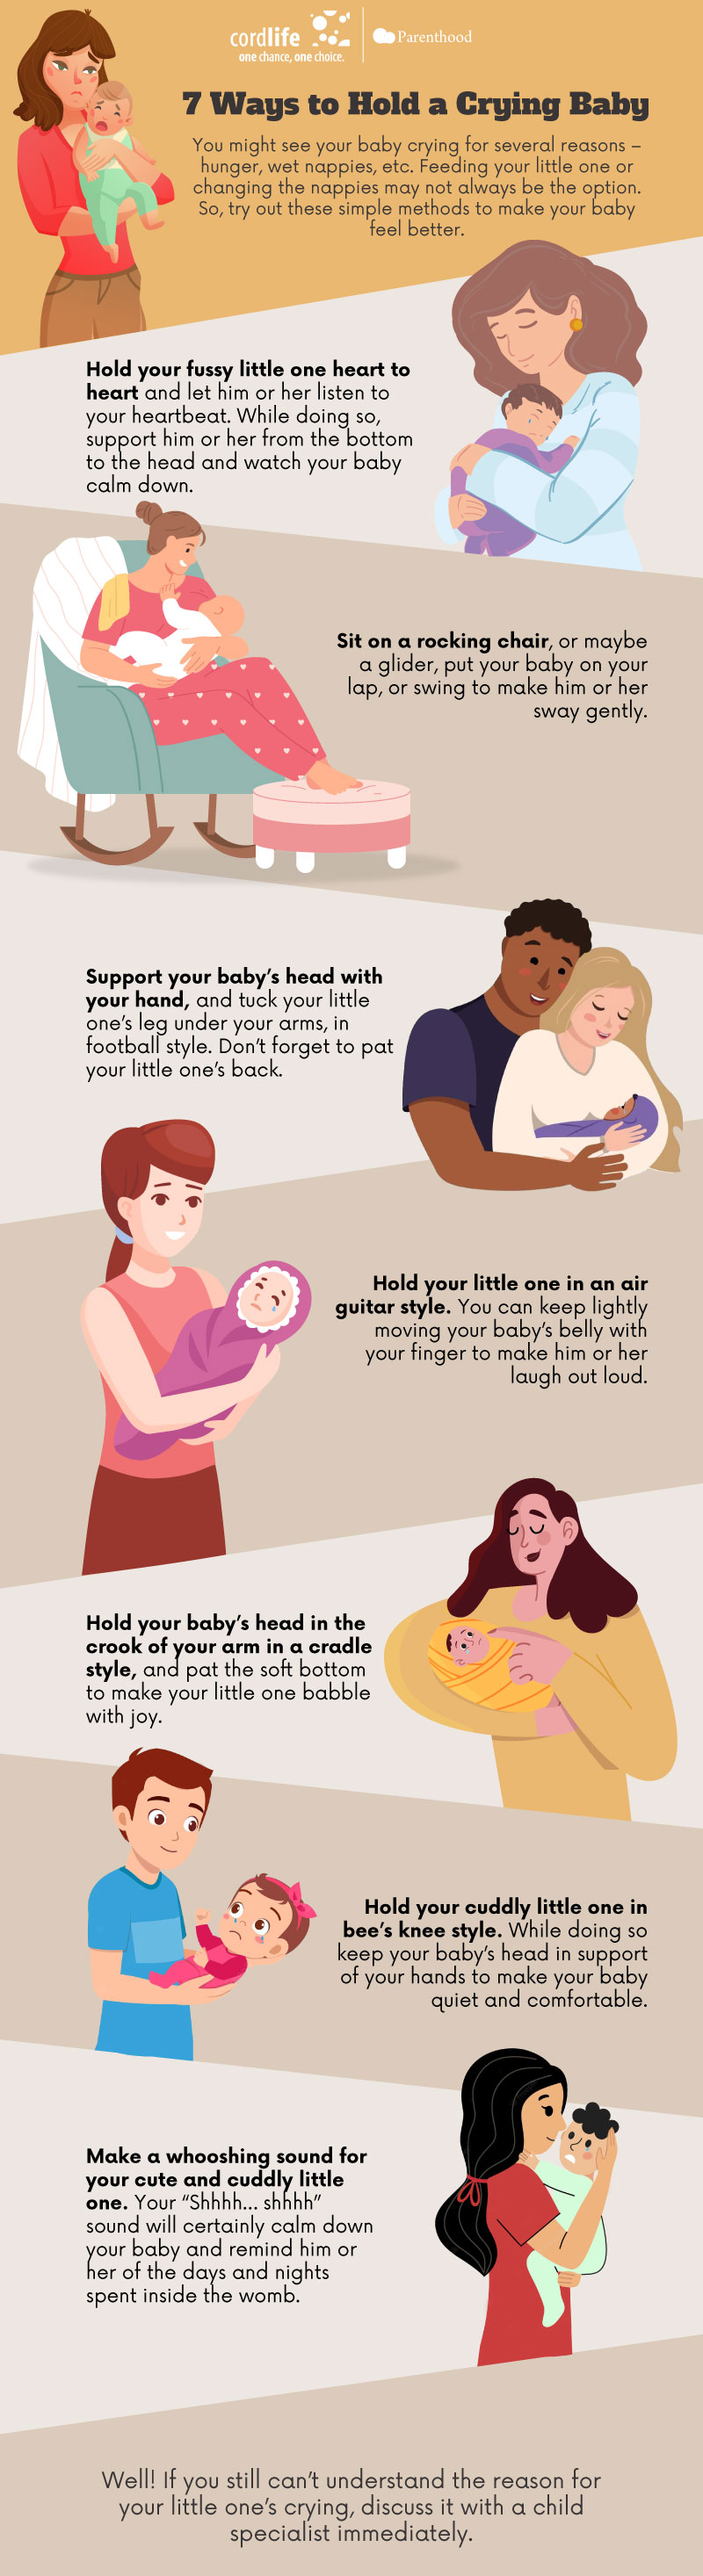 7 Ways to Hold a Crying Baby